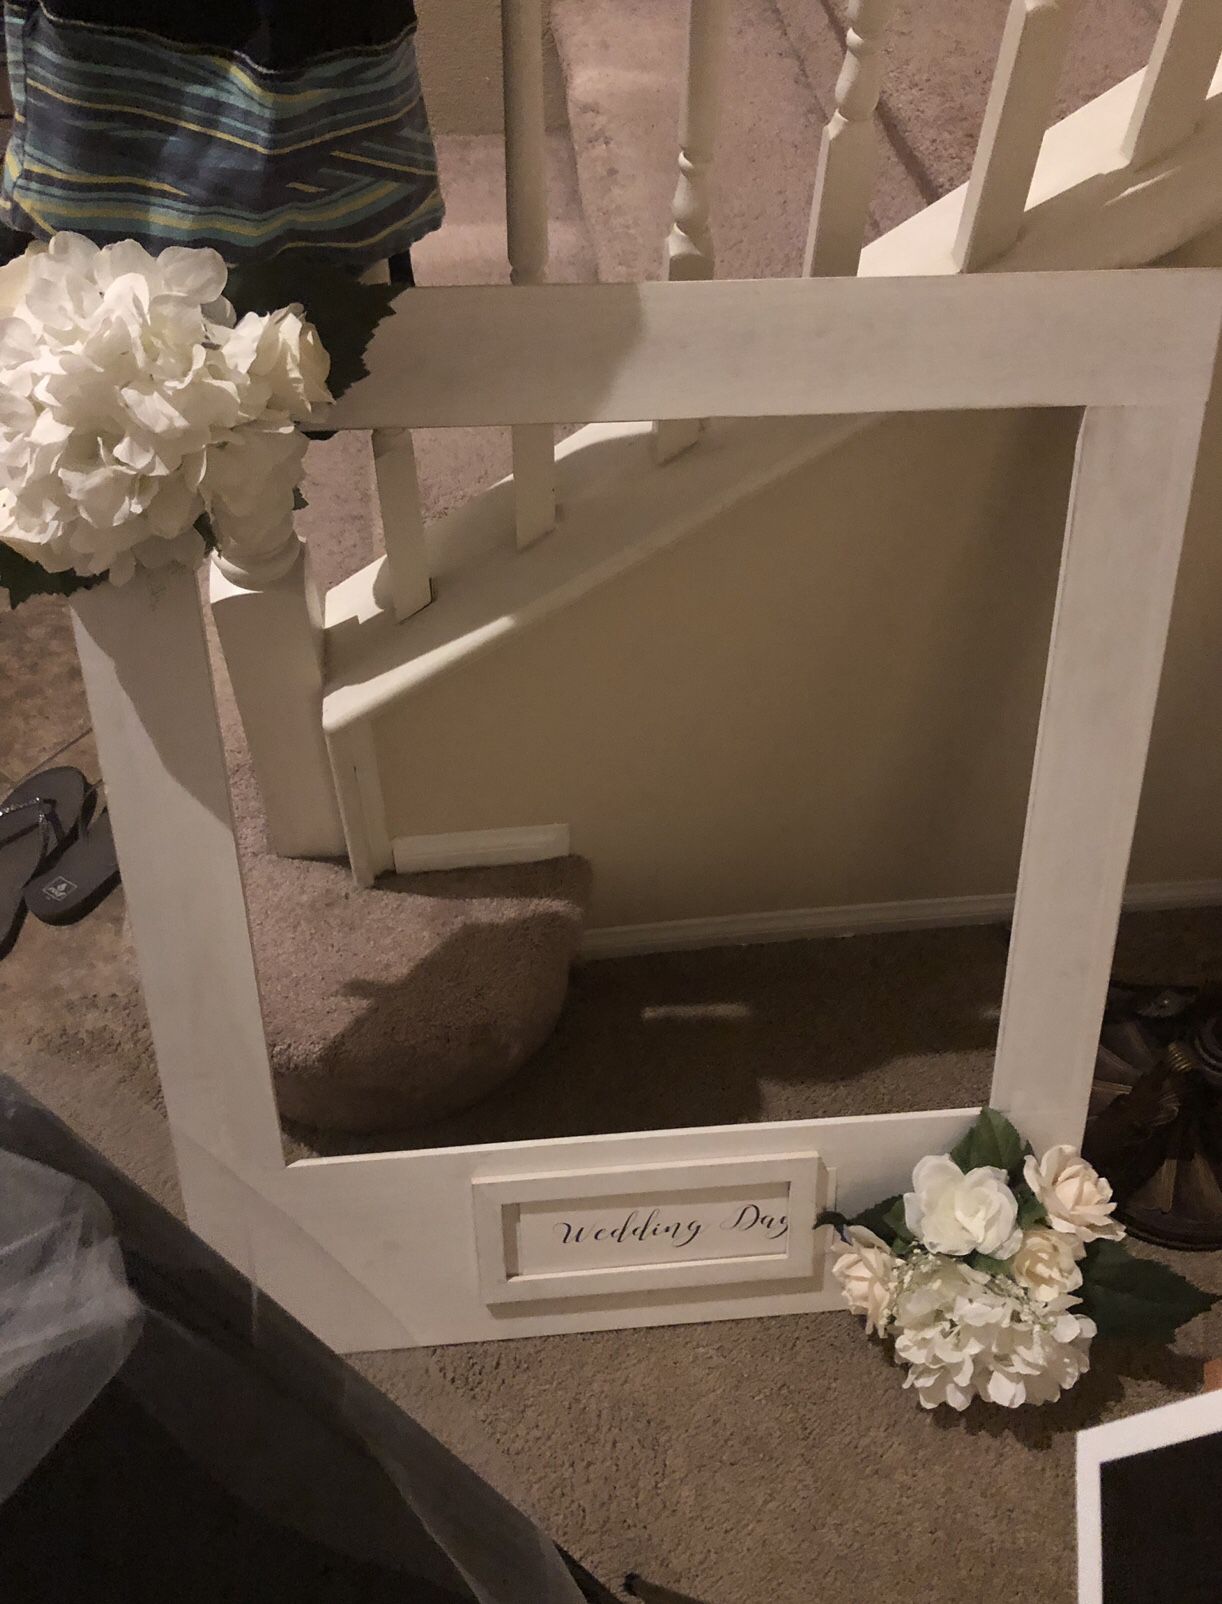 Wedding frame for pictures /photo booth